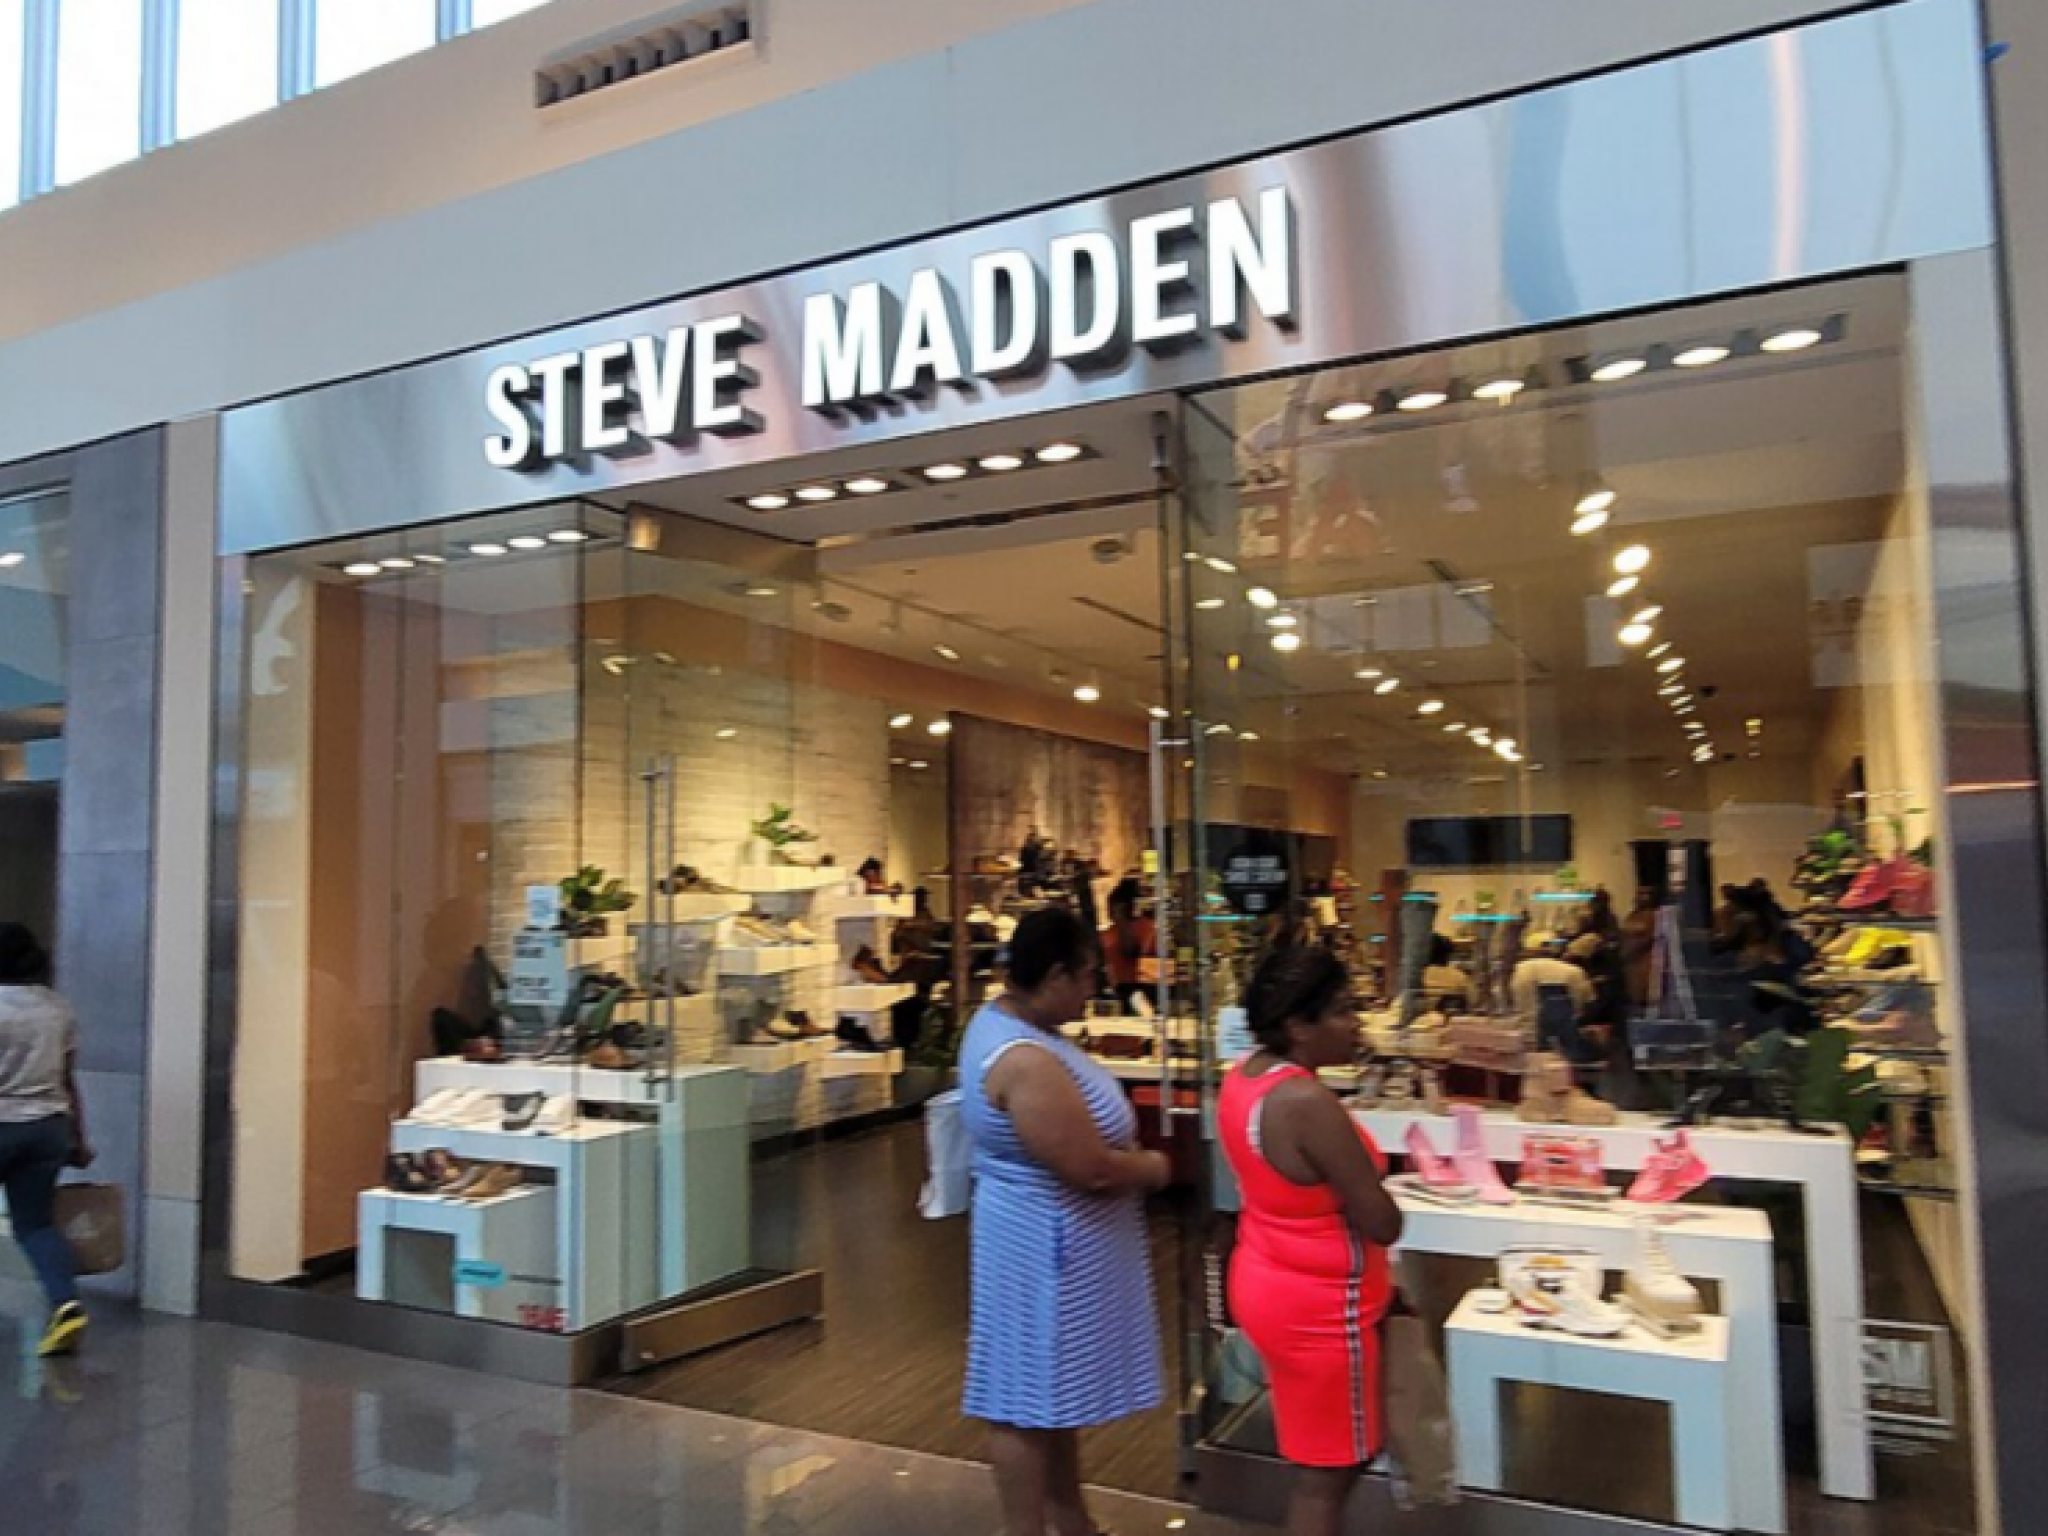  whats-going-on-with-steven-madden-shares-after-q4-results 